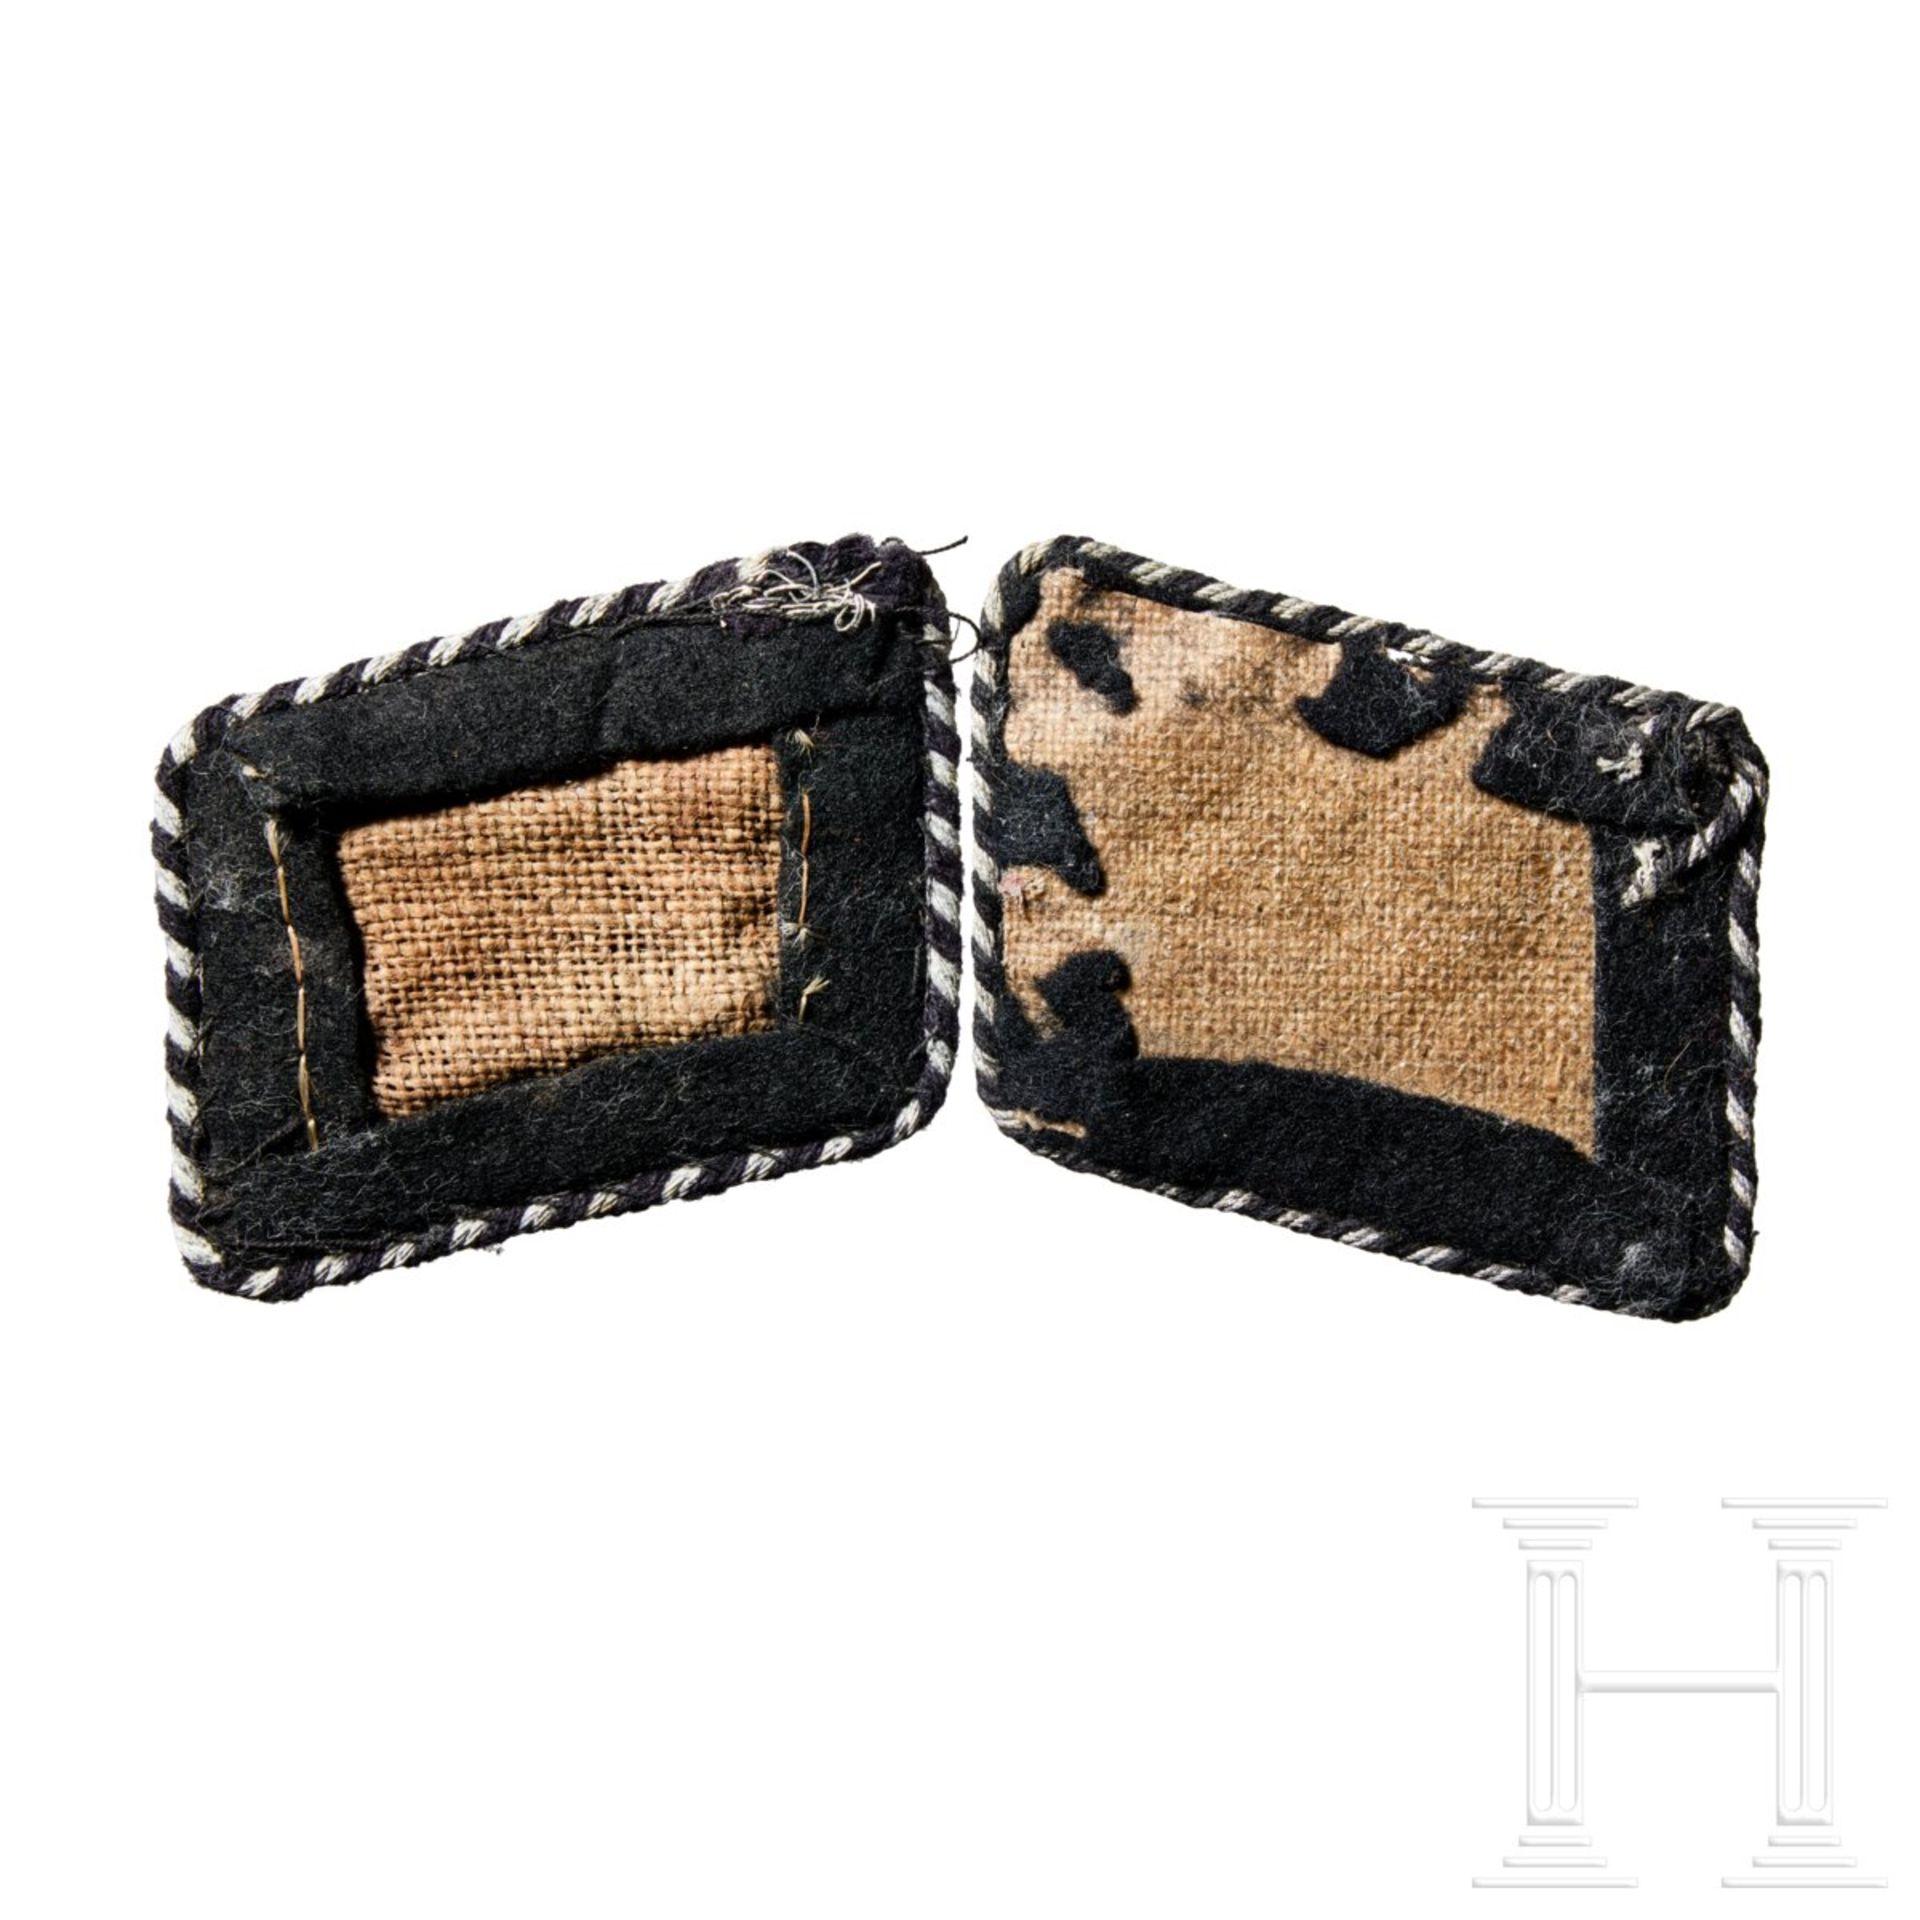 A Pair of Collar Tabs for SS-Pionier Sturmbann 8 "Berlin" Enlisted - Image 2 of 2